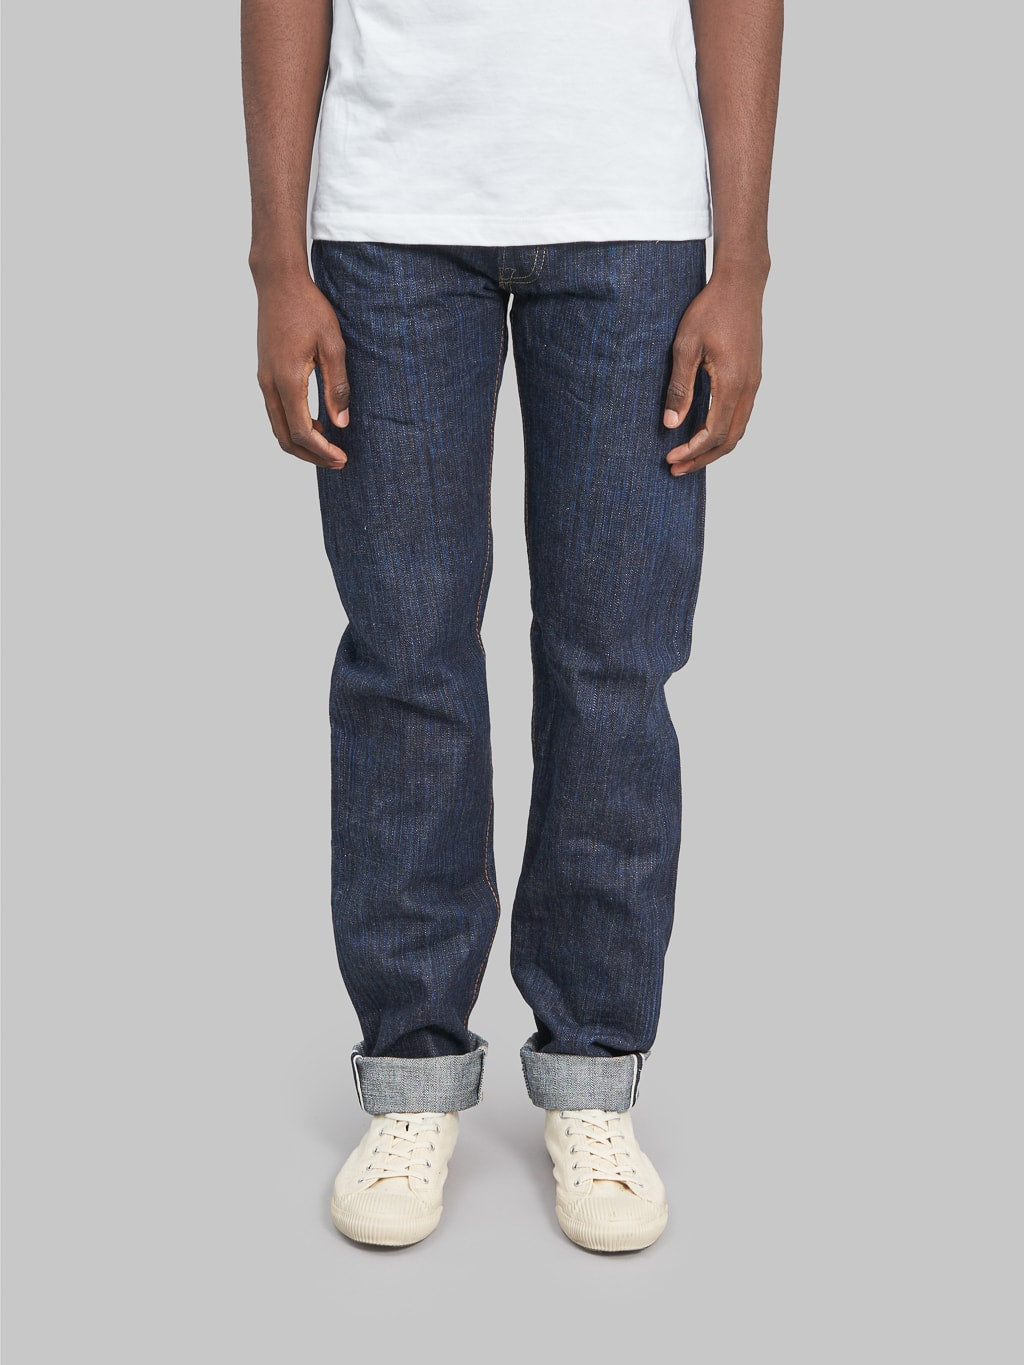 The Strike Gold 8104 Shower Slub straight tapered jeans front